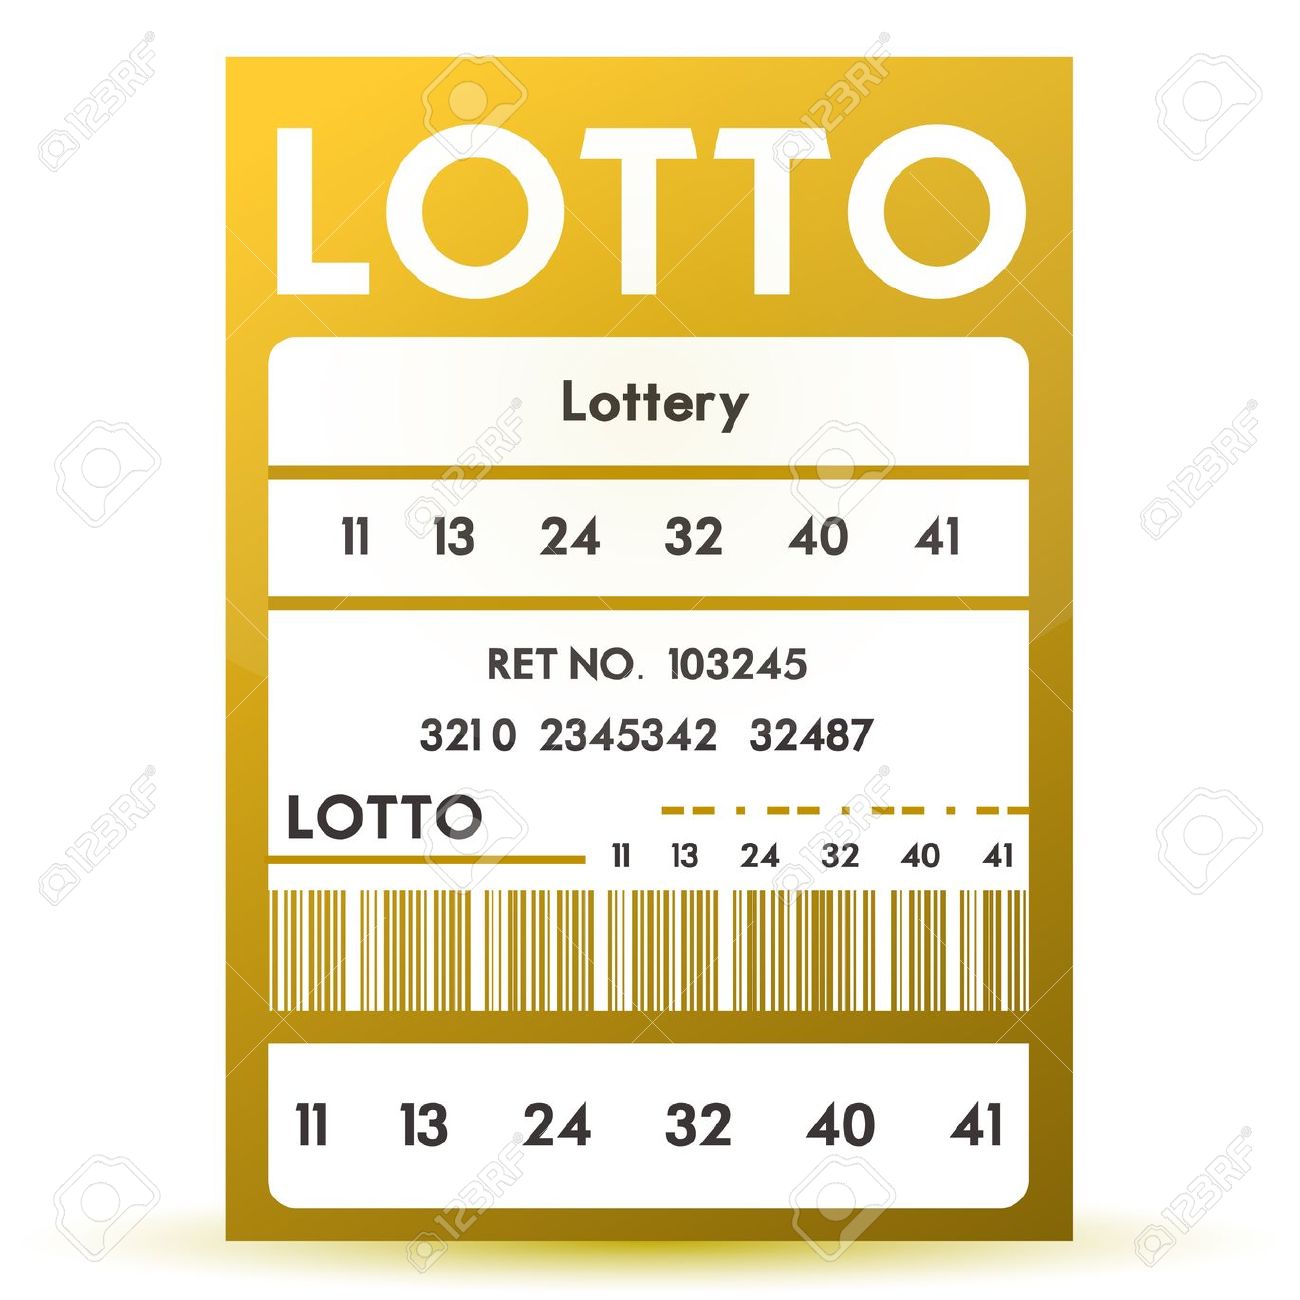 Eps Vector Of Lottery Lotto T